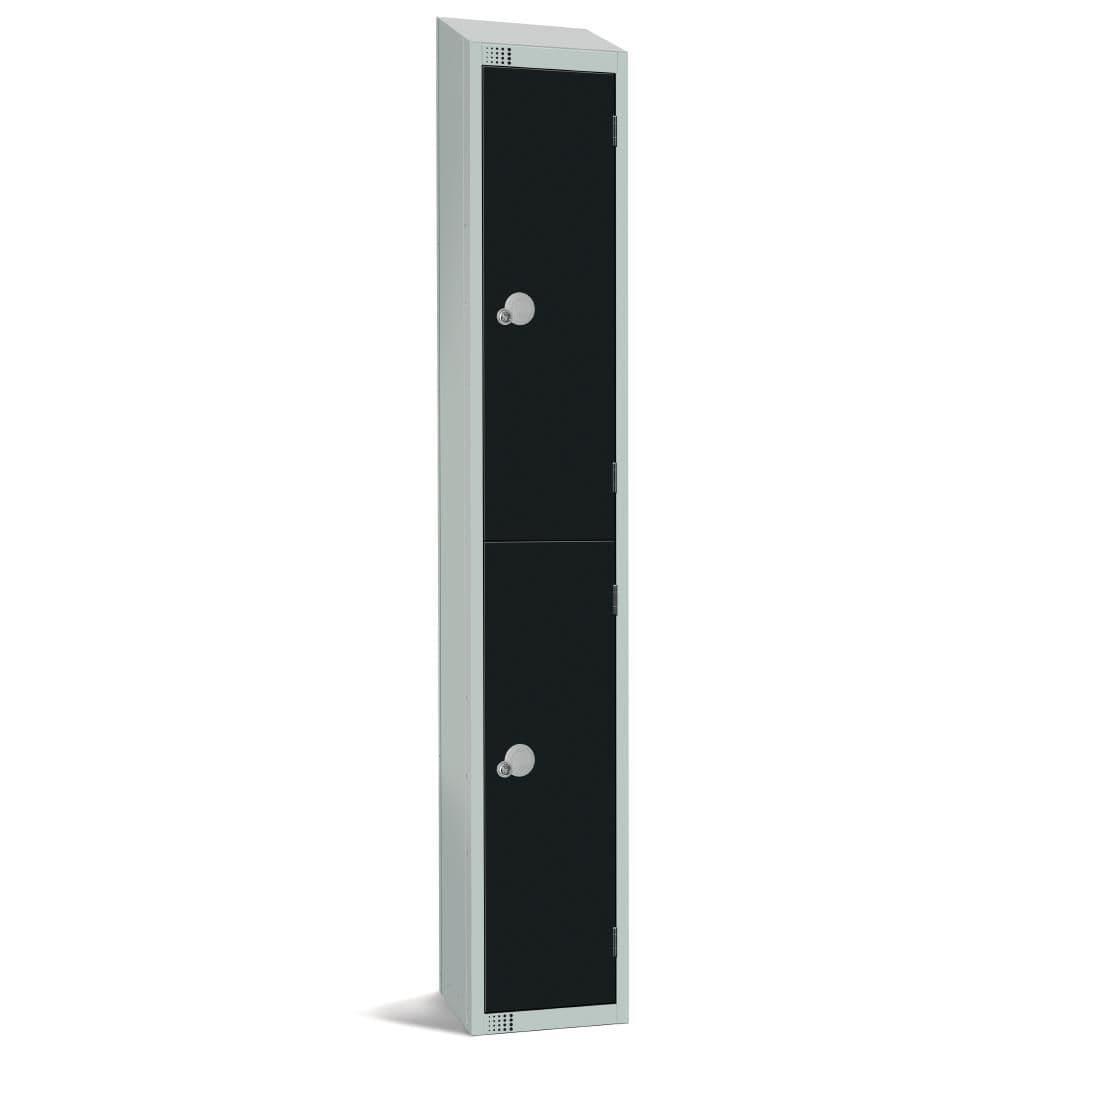 GR671-CNS Elite Double Door Coin Return Locker with Sloping Top Graphite Black JD Catering Equipment Solutions Ltd